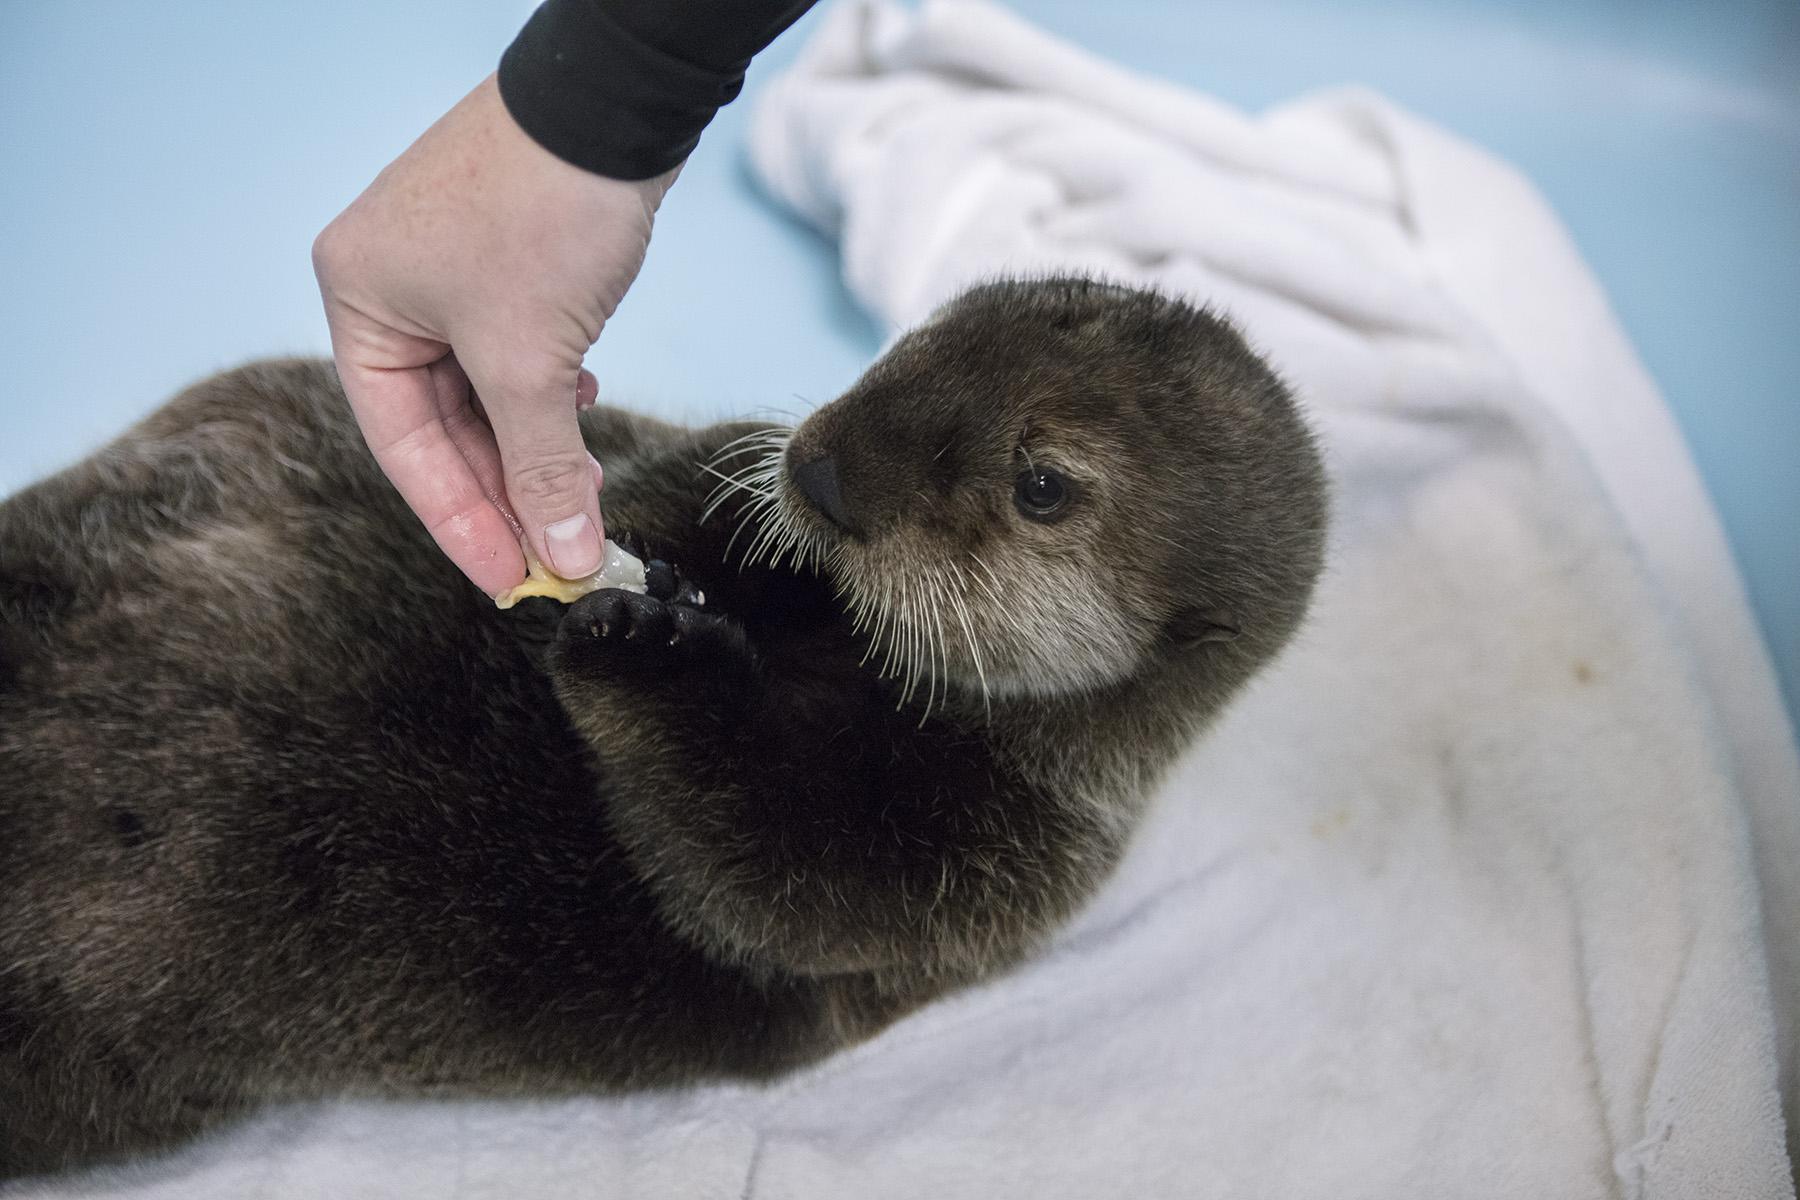 A 2-month old Northern sea otter rescued in September is now in an outdoor habitat at the Alaska SeaLife Center. (Brenna Hernandez / © Shedd Aquarium)